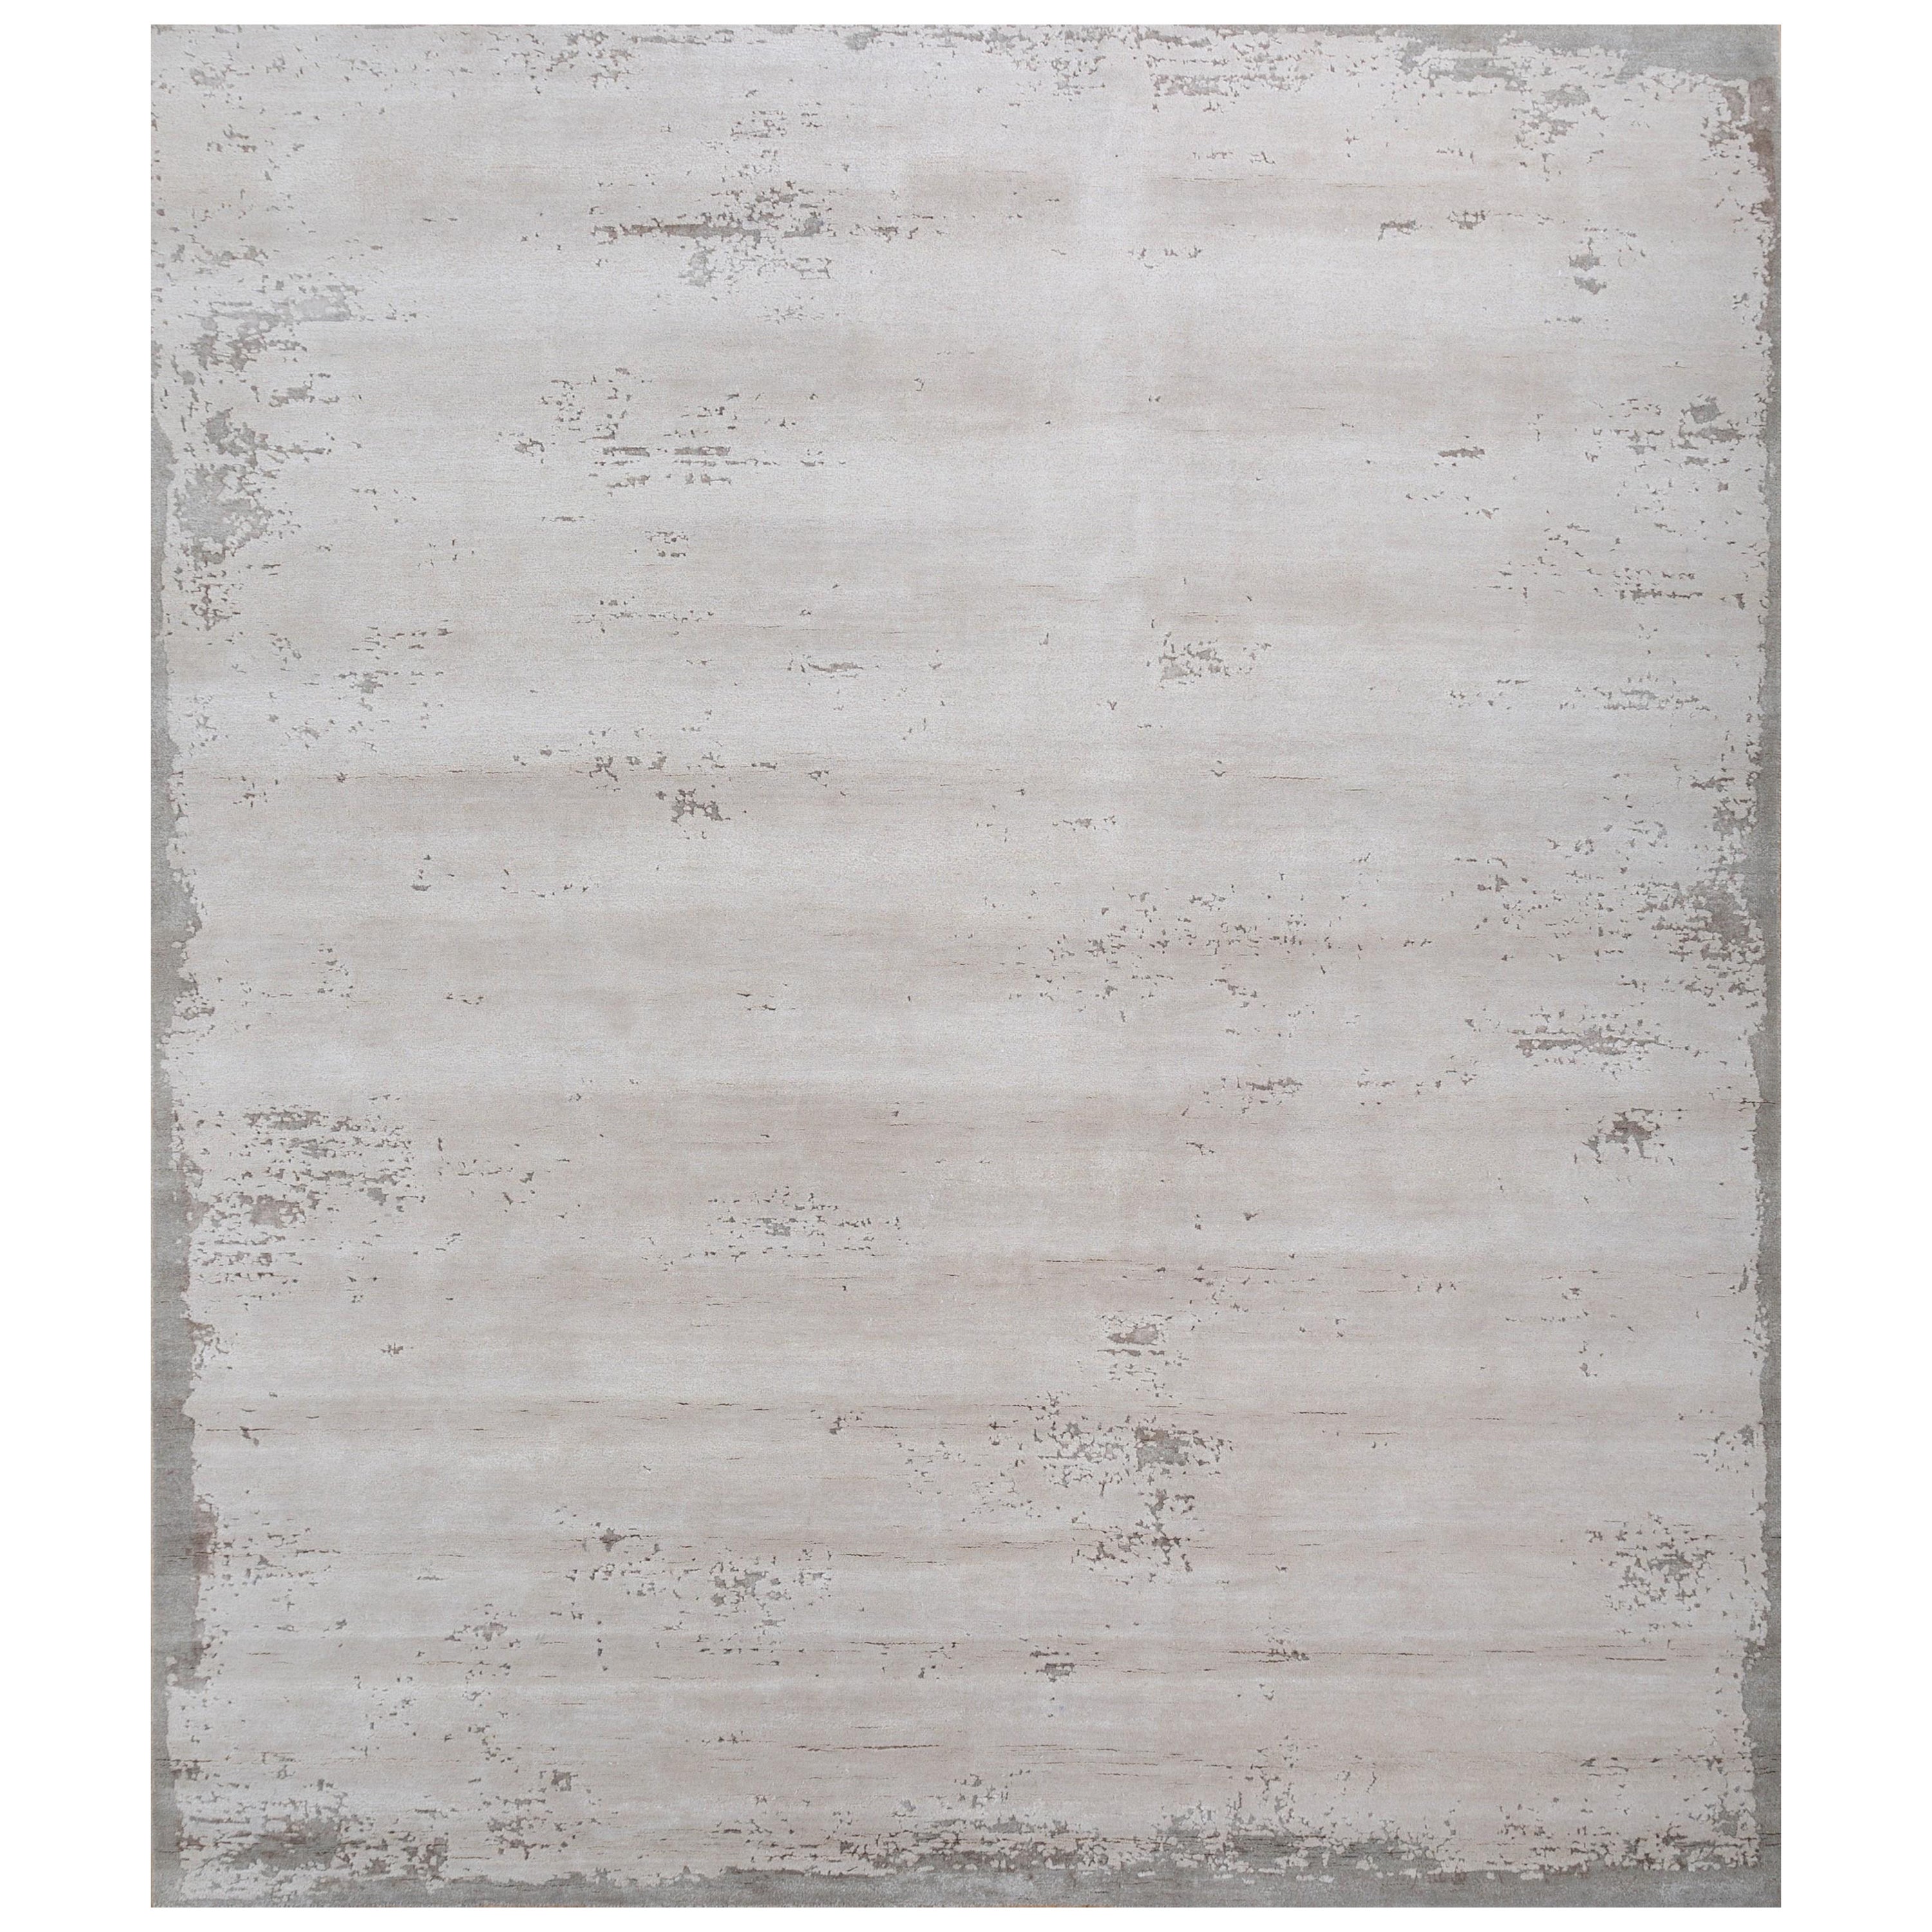 Monochrome Dreams White & Classic Gray 180x270 cm Hand-Knotted Rug